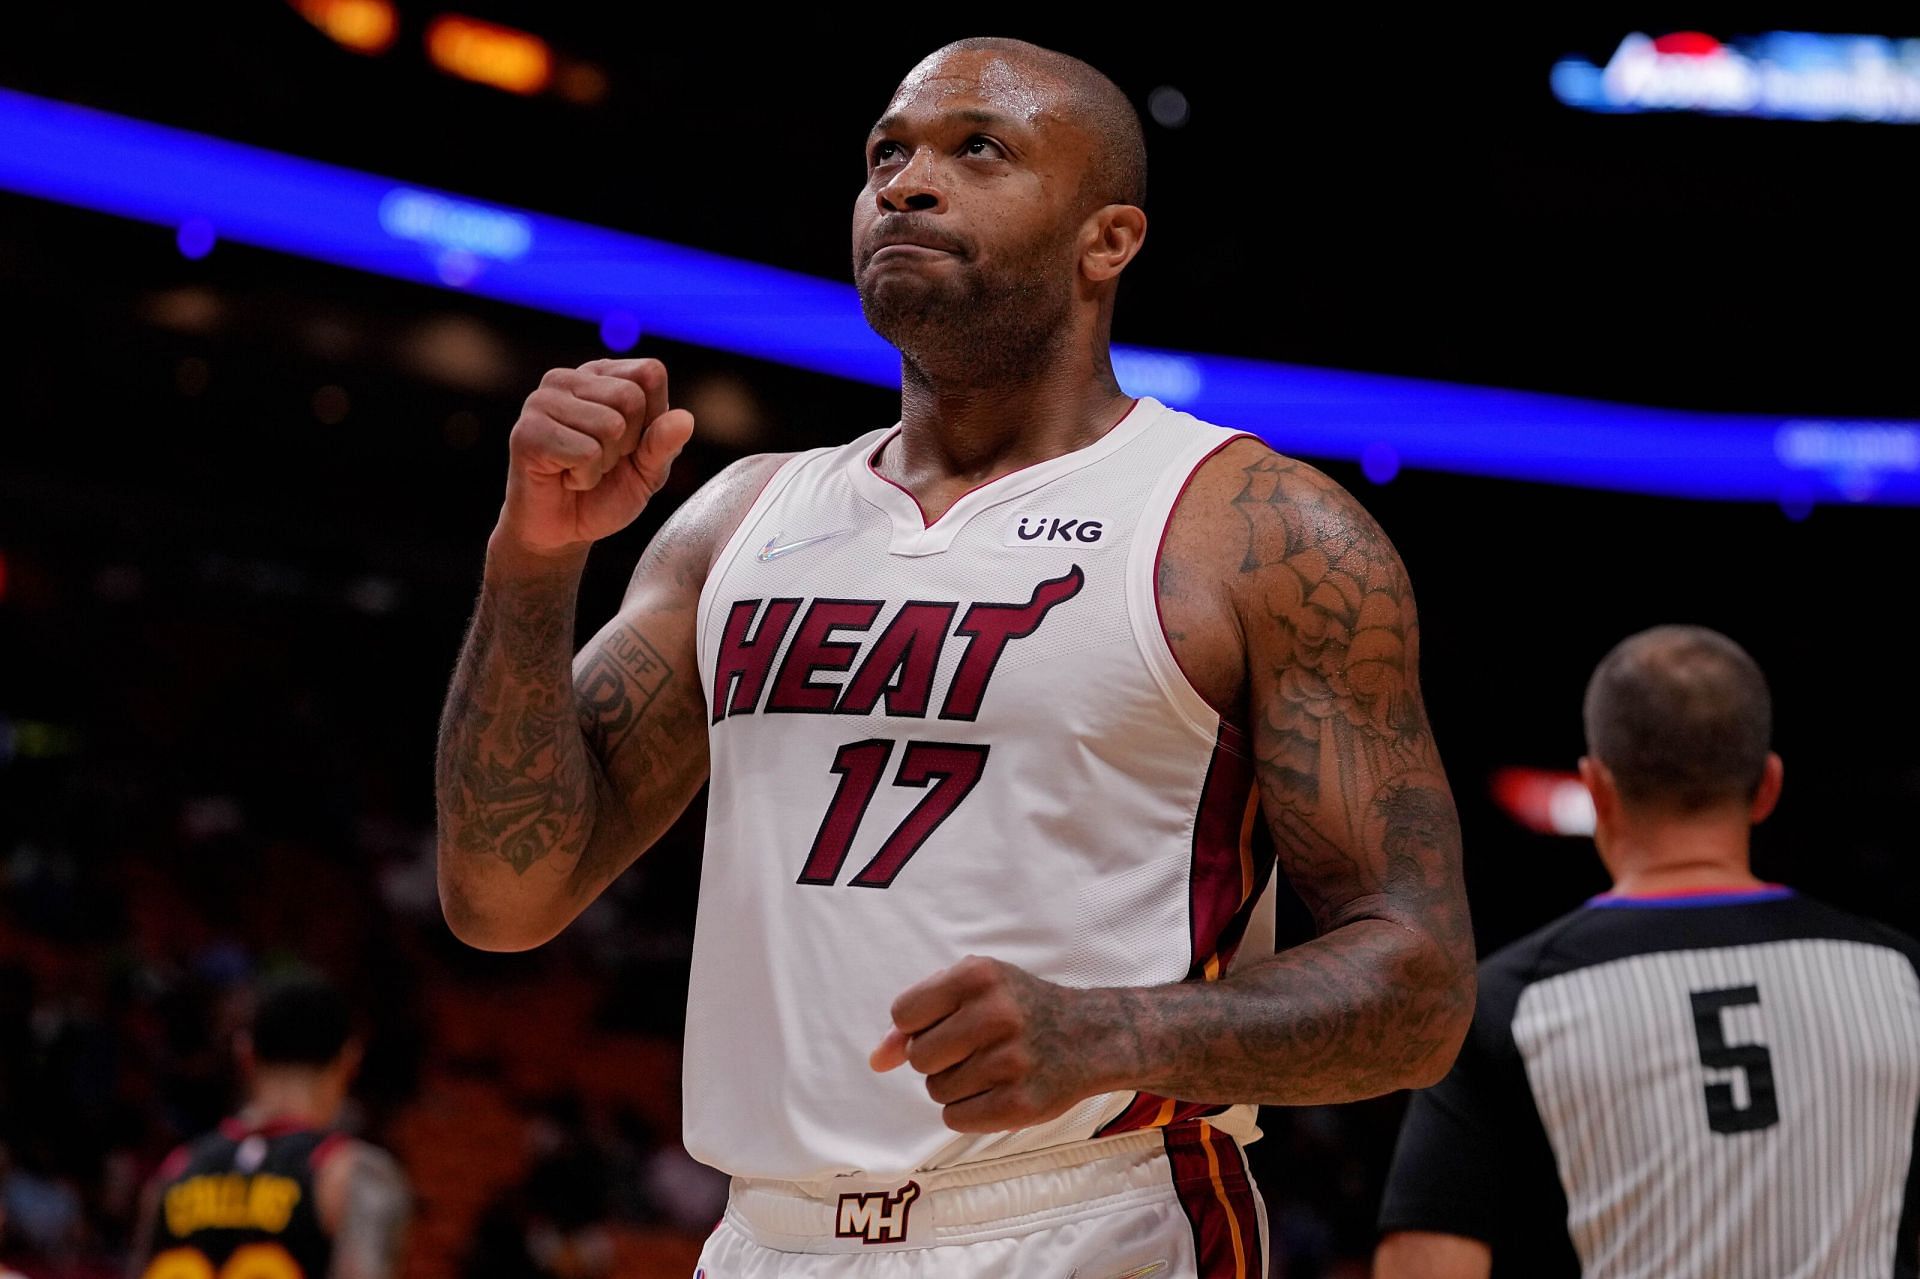 PJ Tucker could end up playing for the Chicago Bulls. [Photo: All U Can Heat]